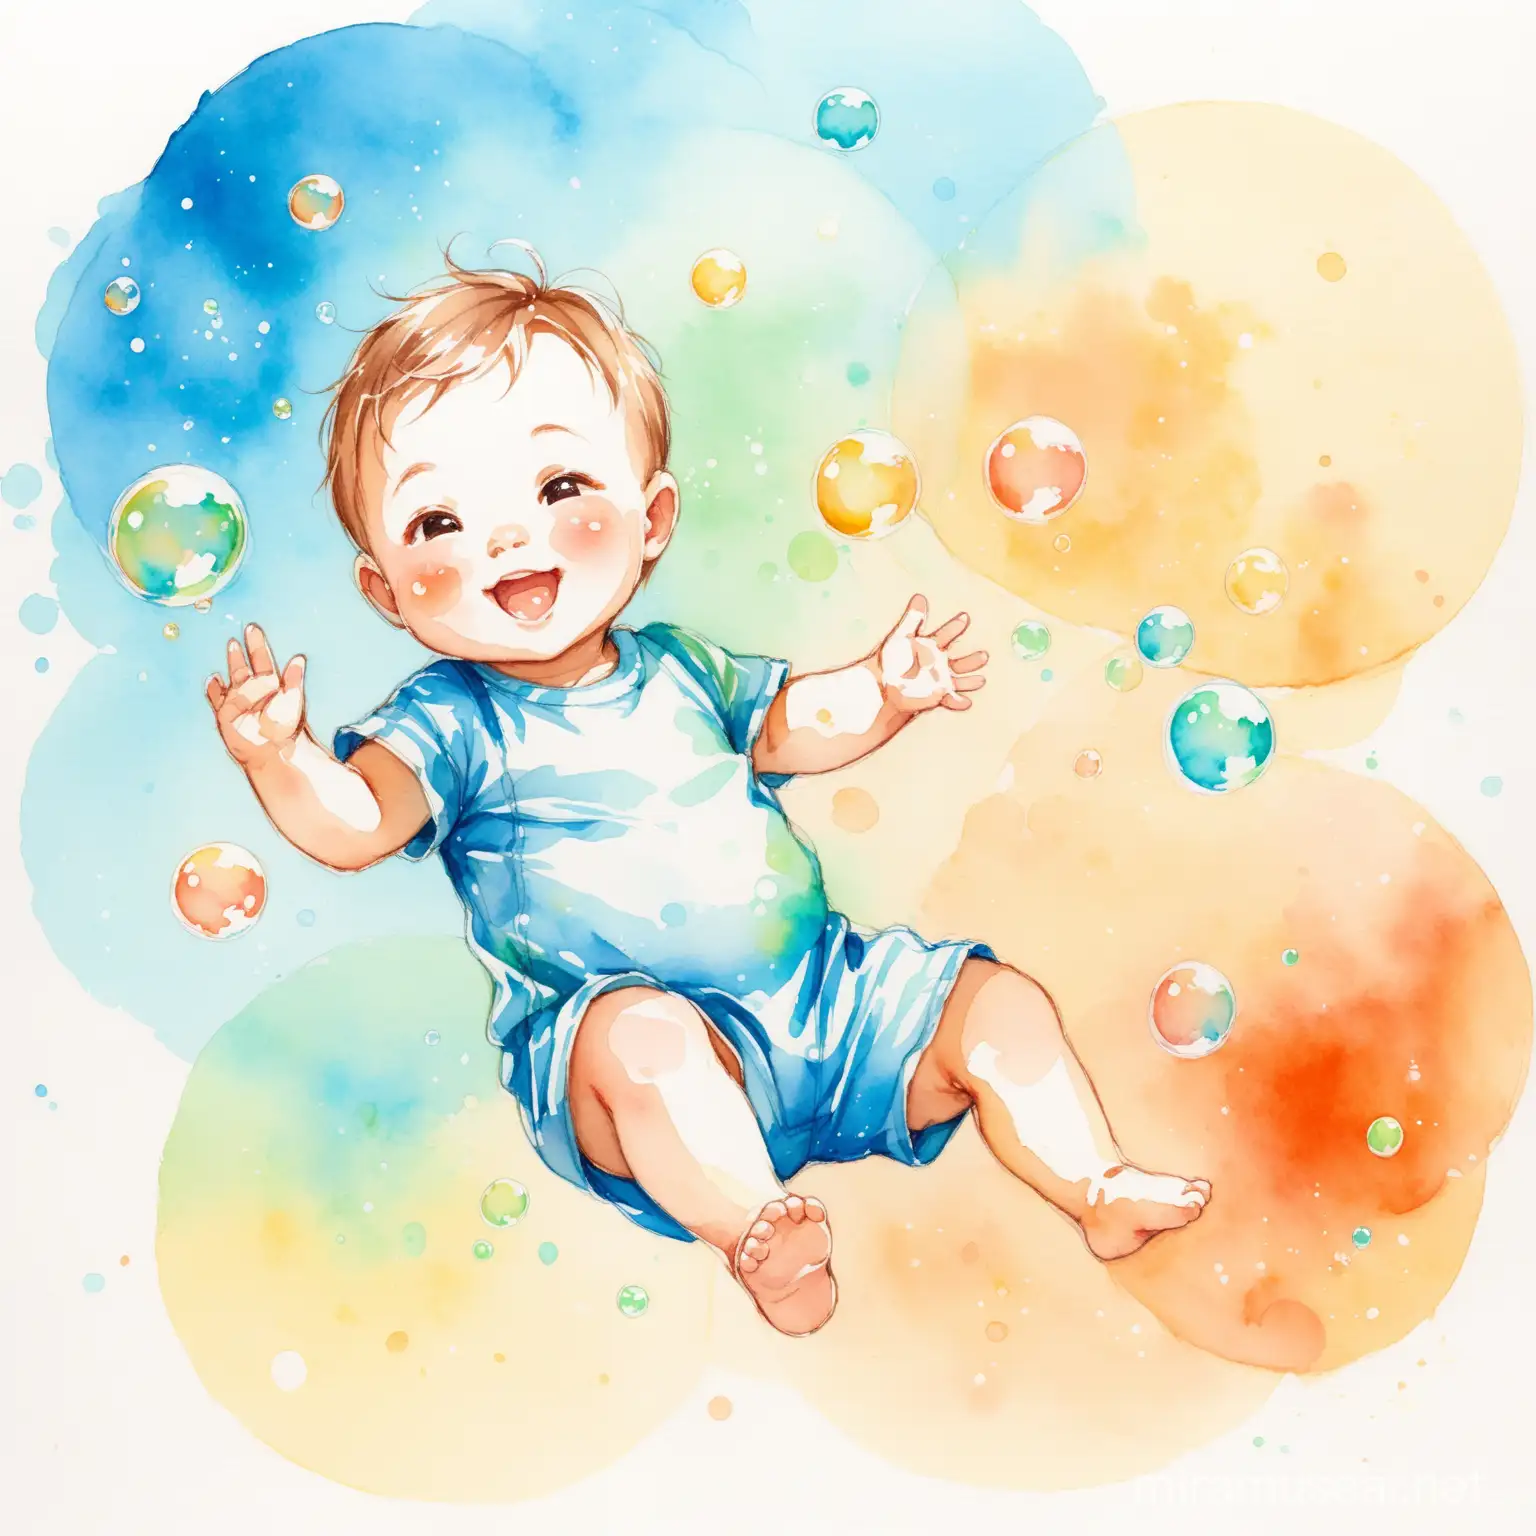 Sketch of happy baby boy 4 years old in watercolor technic . He Plays with bubbles.